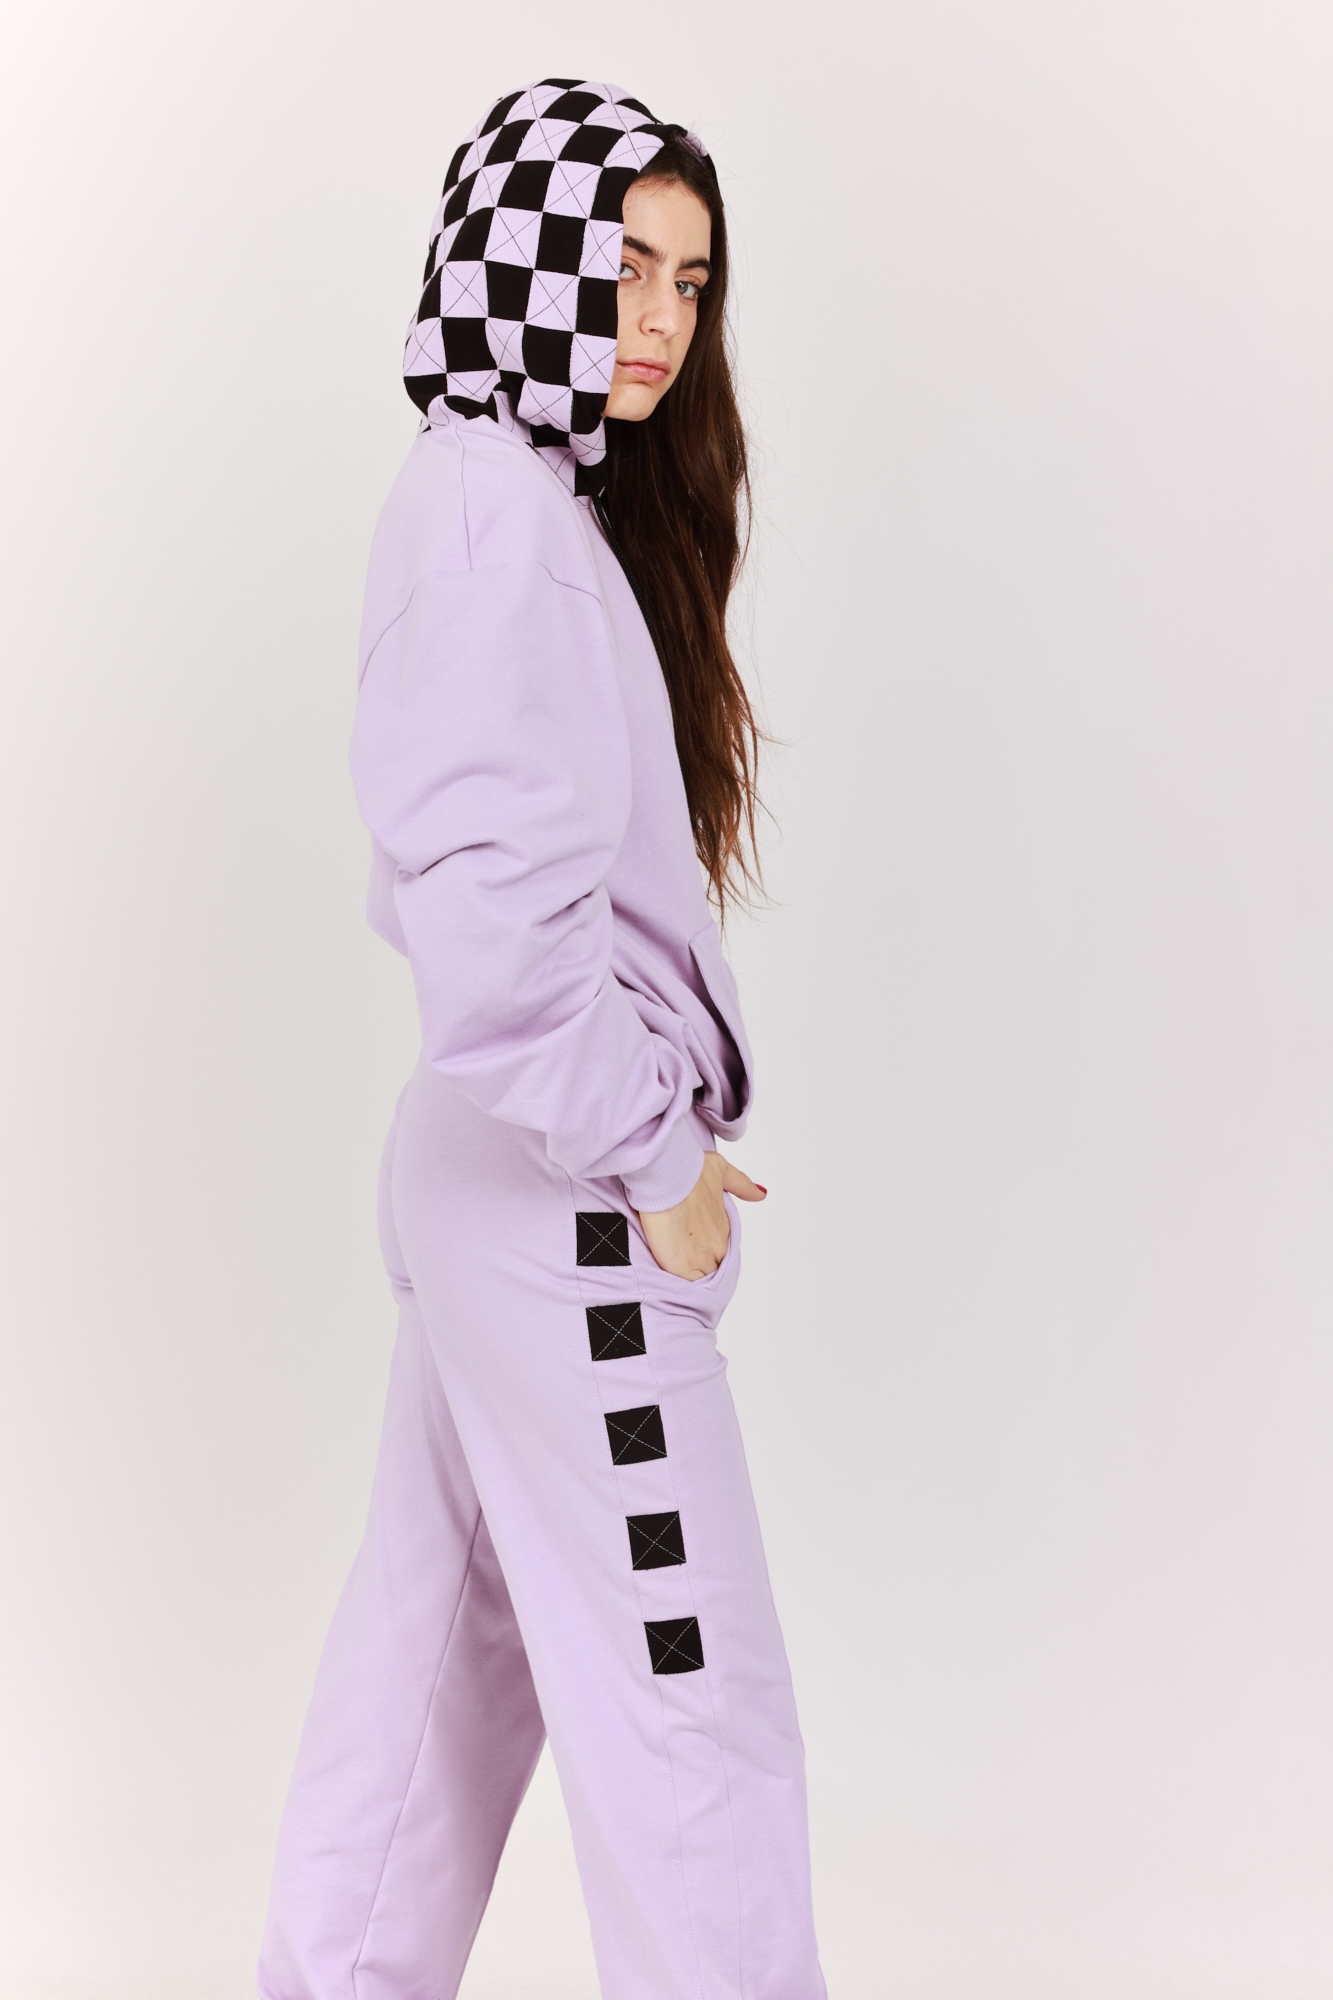 Checkered Hooded Sweatshirt Lilac with Black squares